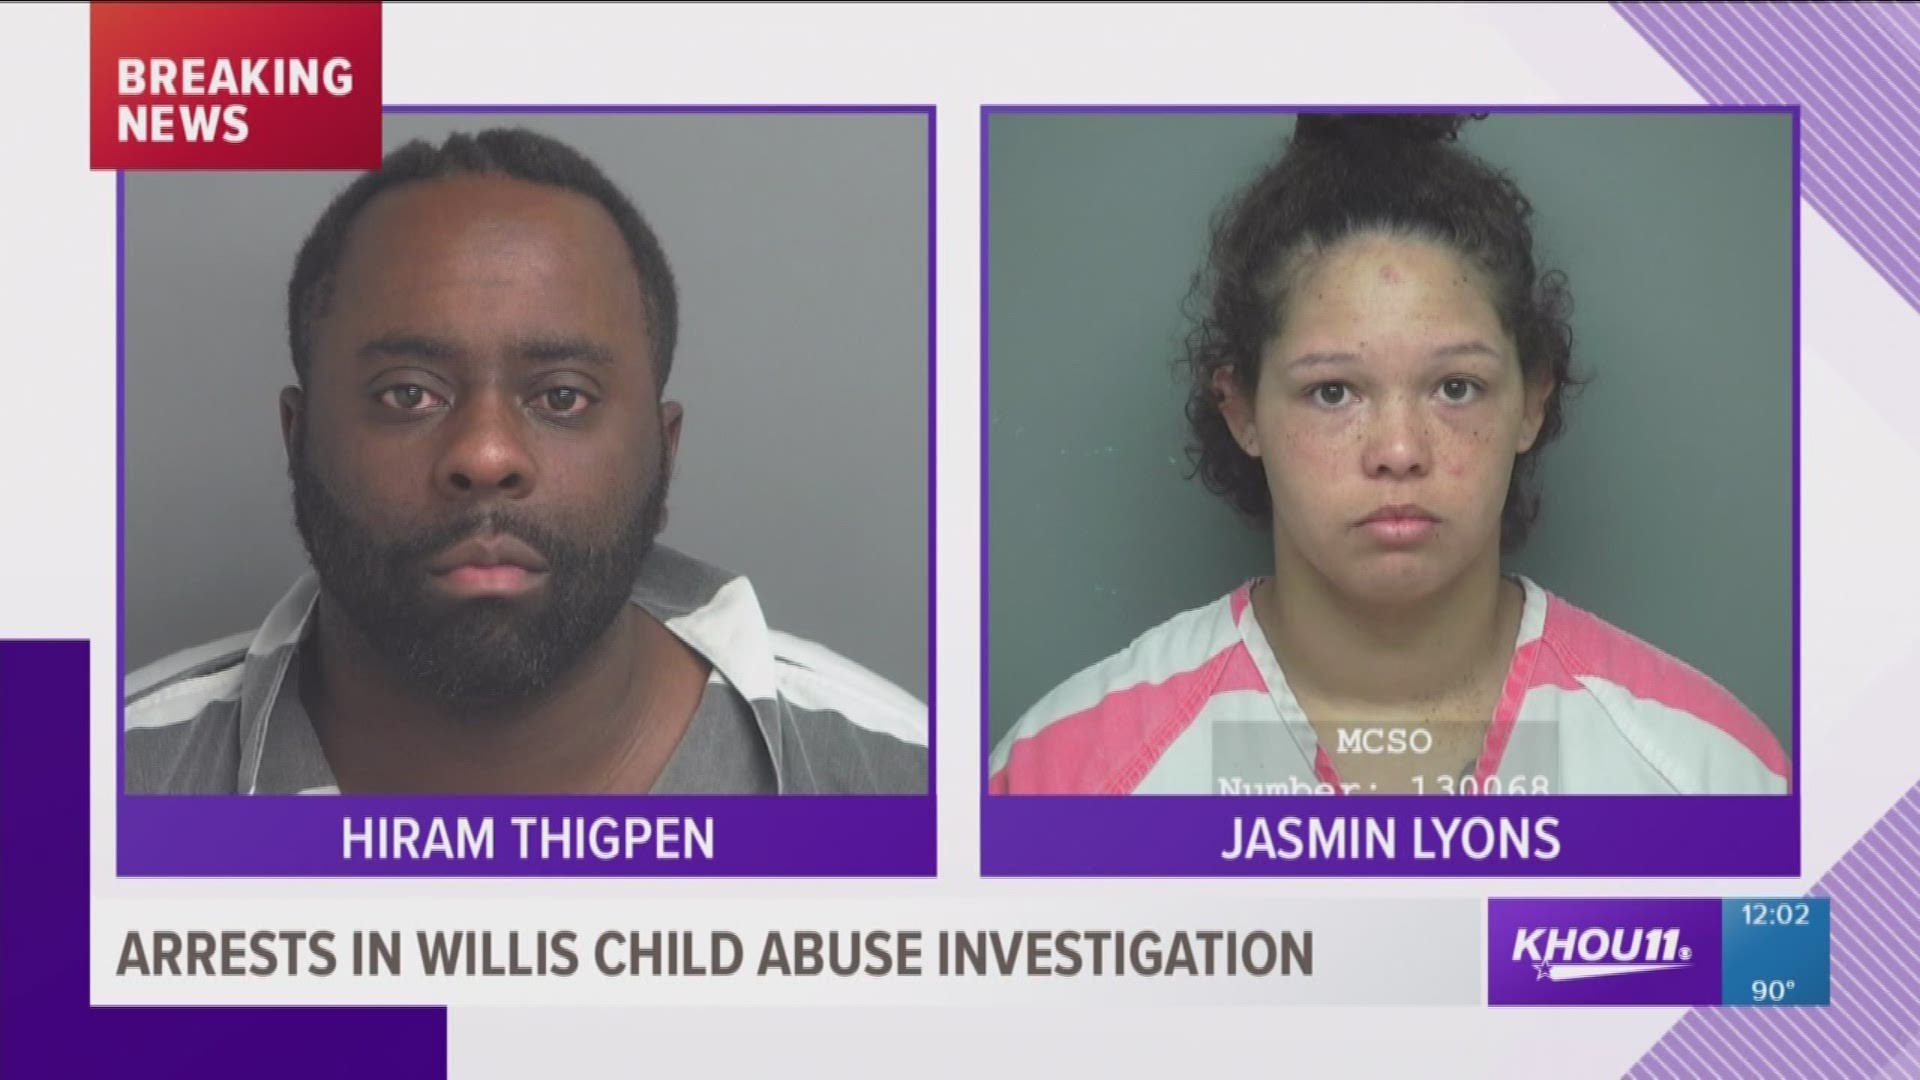 The Montgomery County District Attorney's Office said Hiram Thigpen was arrested on June 12 for the felony offense of injury to a child, a third-degree felony. Jasmin Lyons was also arrested on June 12 for the felony offense of Injury to a disabled child,